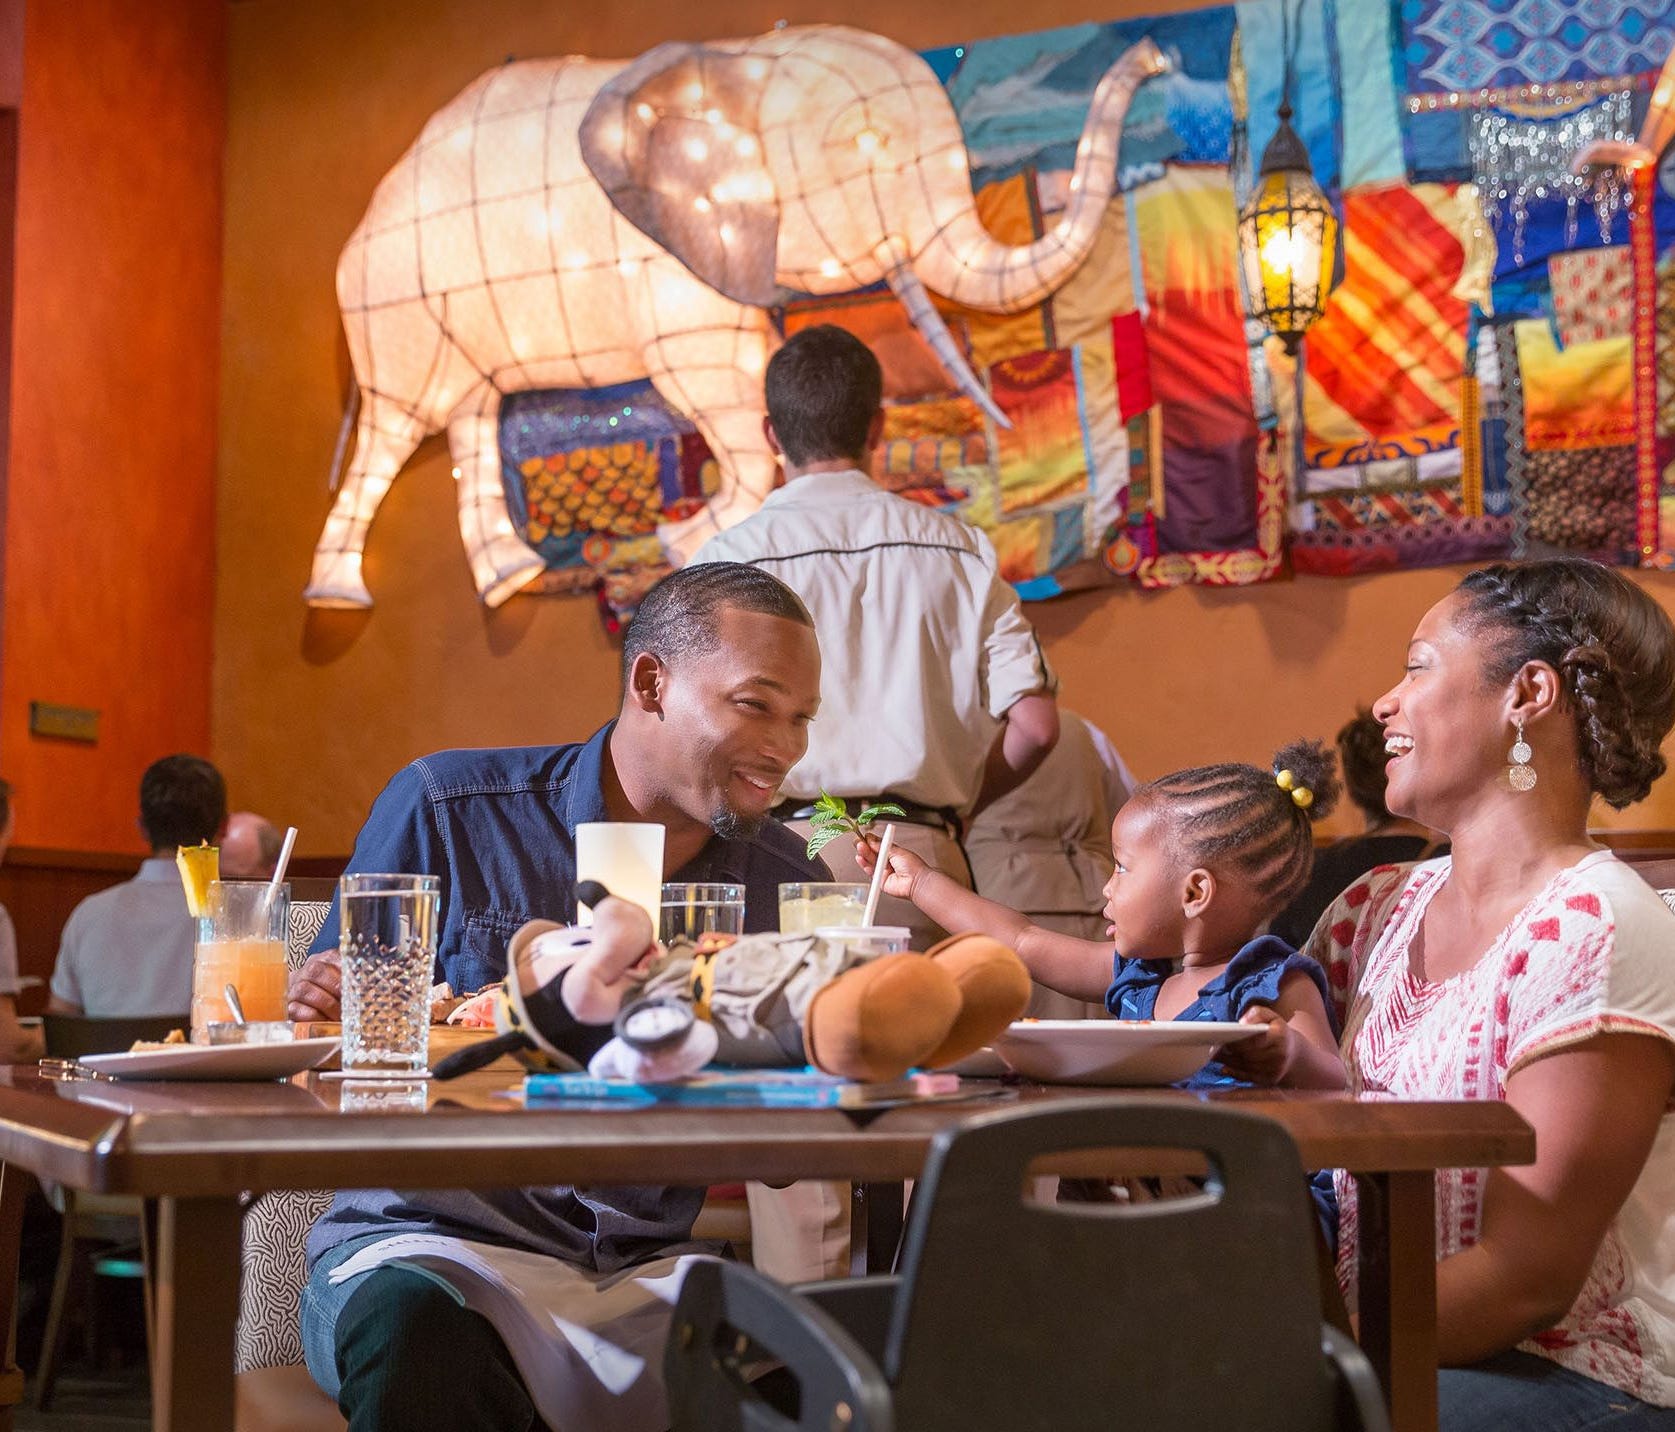 Tiffins, a new restaurant at Disney's Animal Kingdom celebrates the art of traveling and includes the adjoining Nomad Lounge with waterfront views with outdoor seating. Open for both lunch and dinner, Tiffins' menu features a diverse menu drawing fro